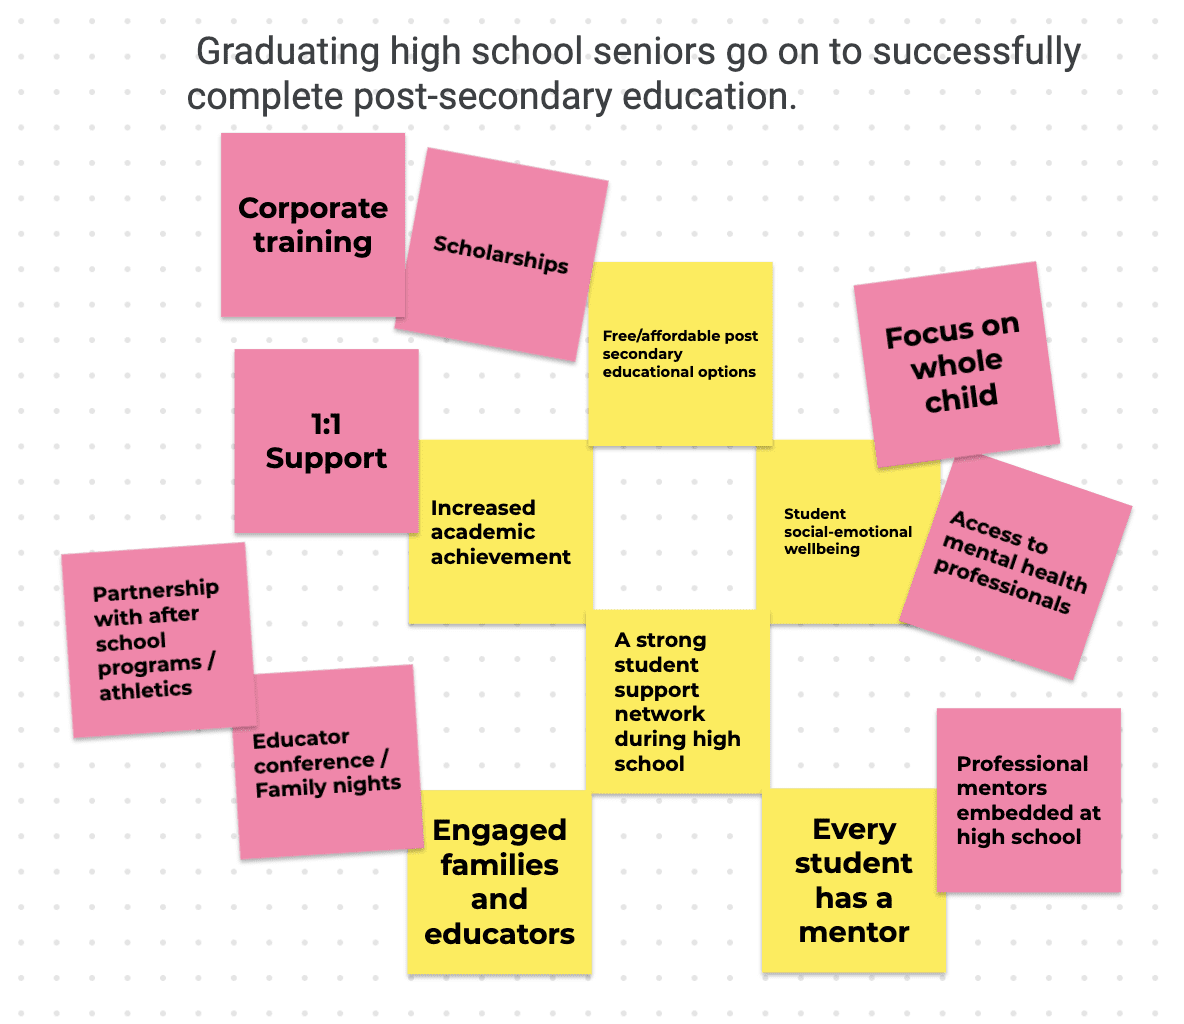 A digital whiteboard with post-its. The title reads "Graduating high school seniors go on to successfully complete post-secondary education." The post-its read, "Corporate training," "1:1 support," "partnership with after school programs/athletics," "educator conference/family nights," "scholarships," "increased academic achievement," "free/affordable post-secondary educational options," "a strong student support network during high school," "engaged families and educators," "student social-emotional wellbeing," "every student has a mentor," "focus on whole-child," "access to mental health professionals," and "professional mentors embedded at high school."